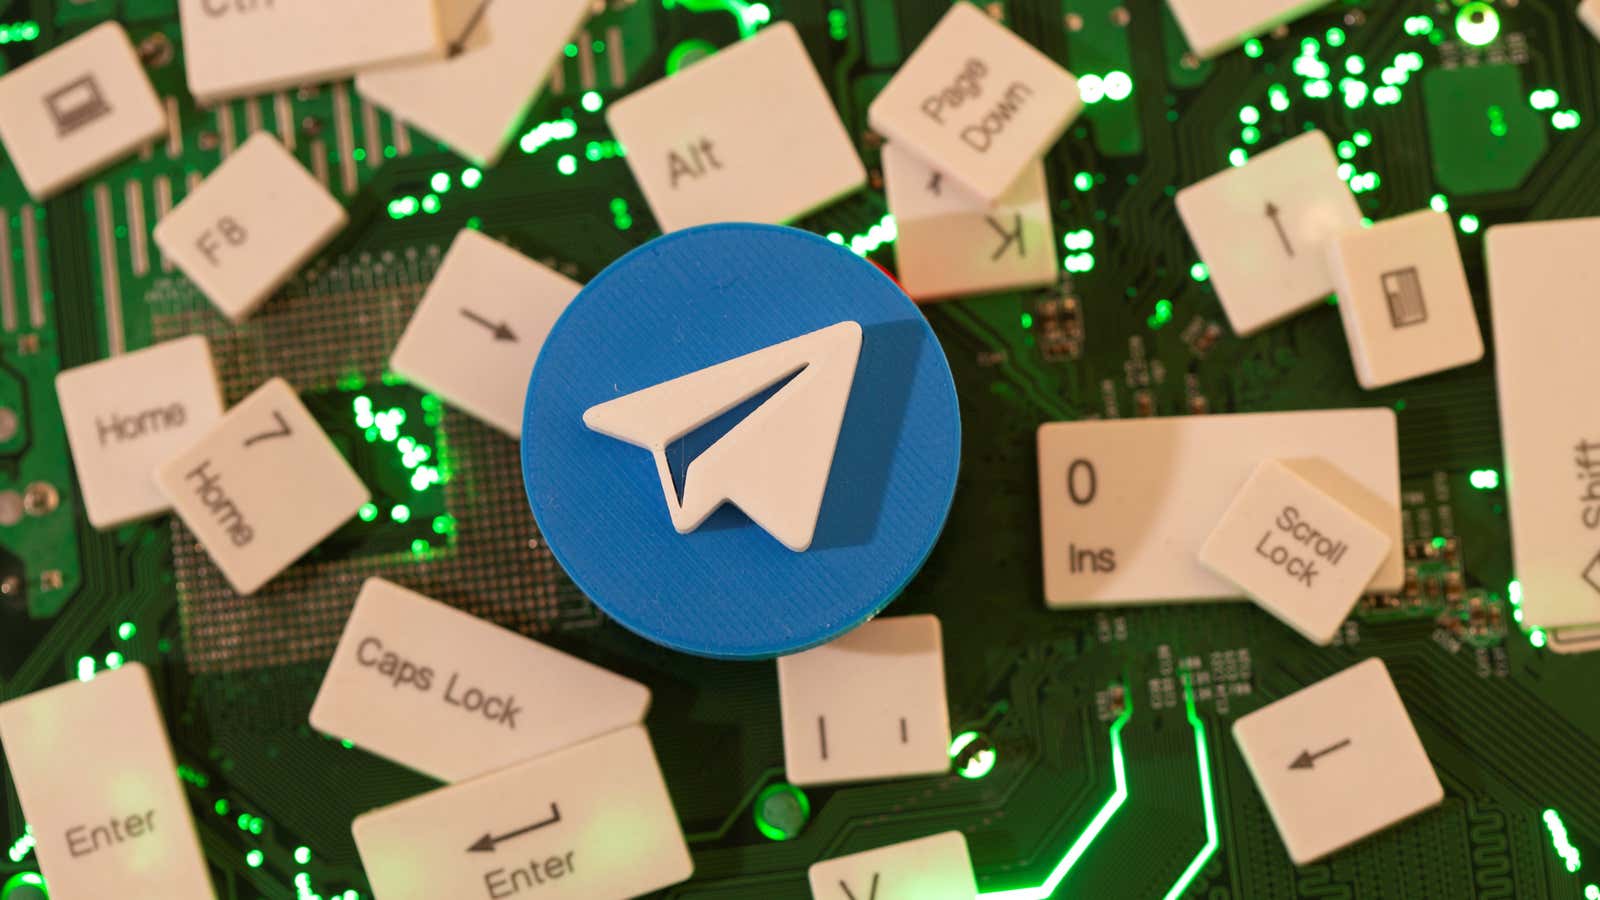 The app Telegram has become a crucial messaging service in Russia and Ukraine.